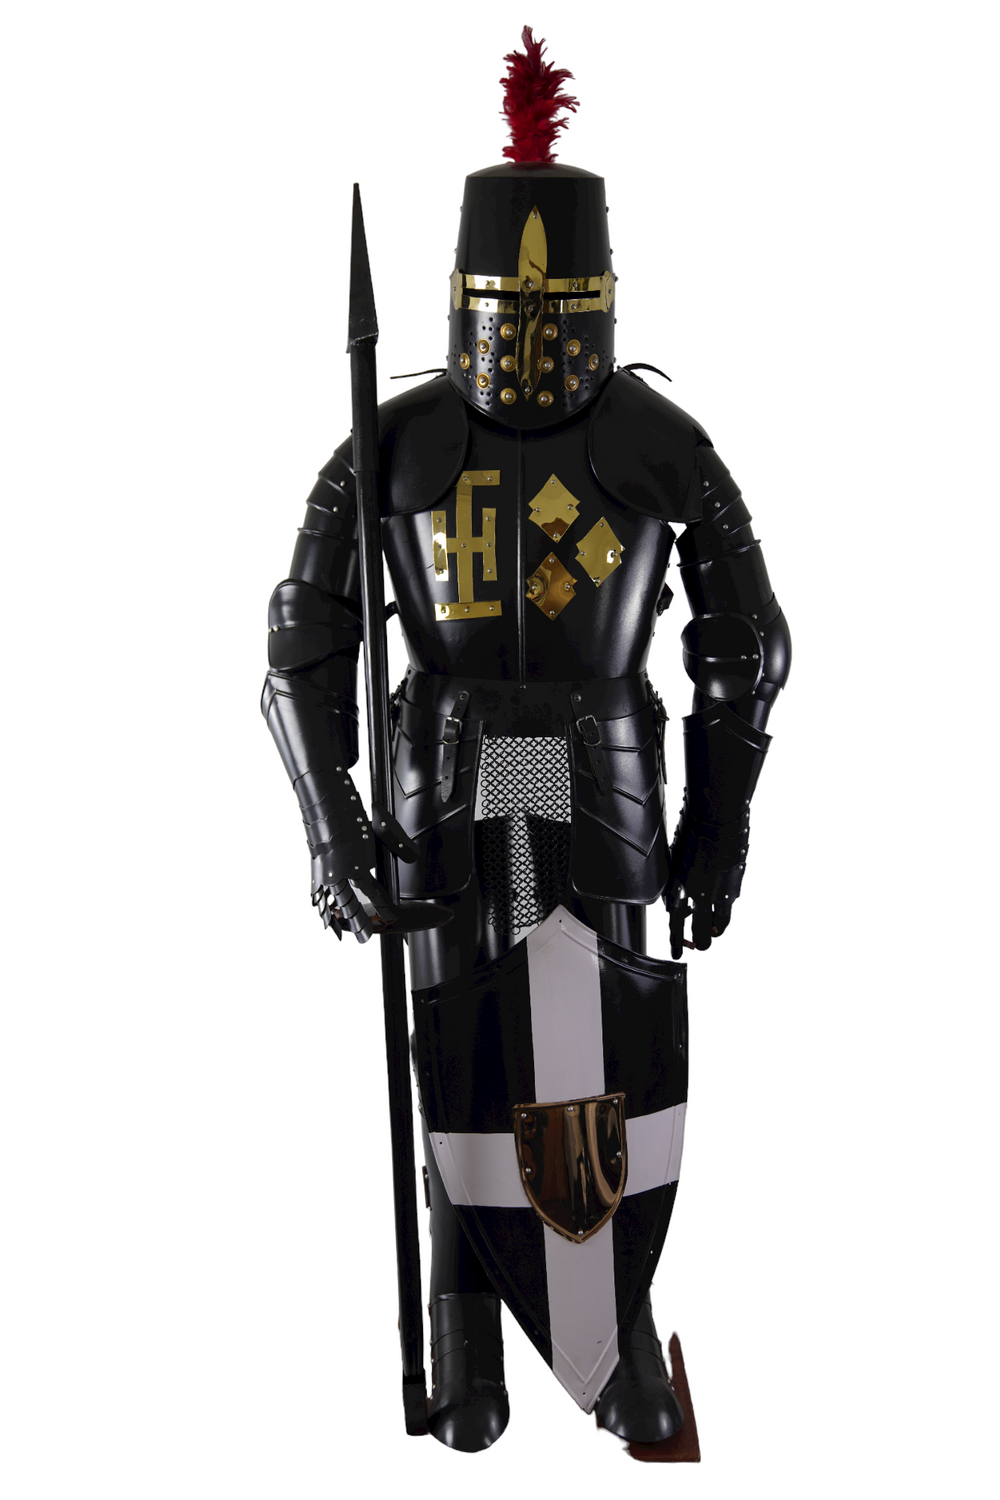 Jousting Black Knight Suit of Armor – Wearable Steel Suit of Armor with Shield